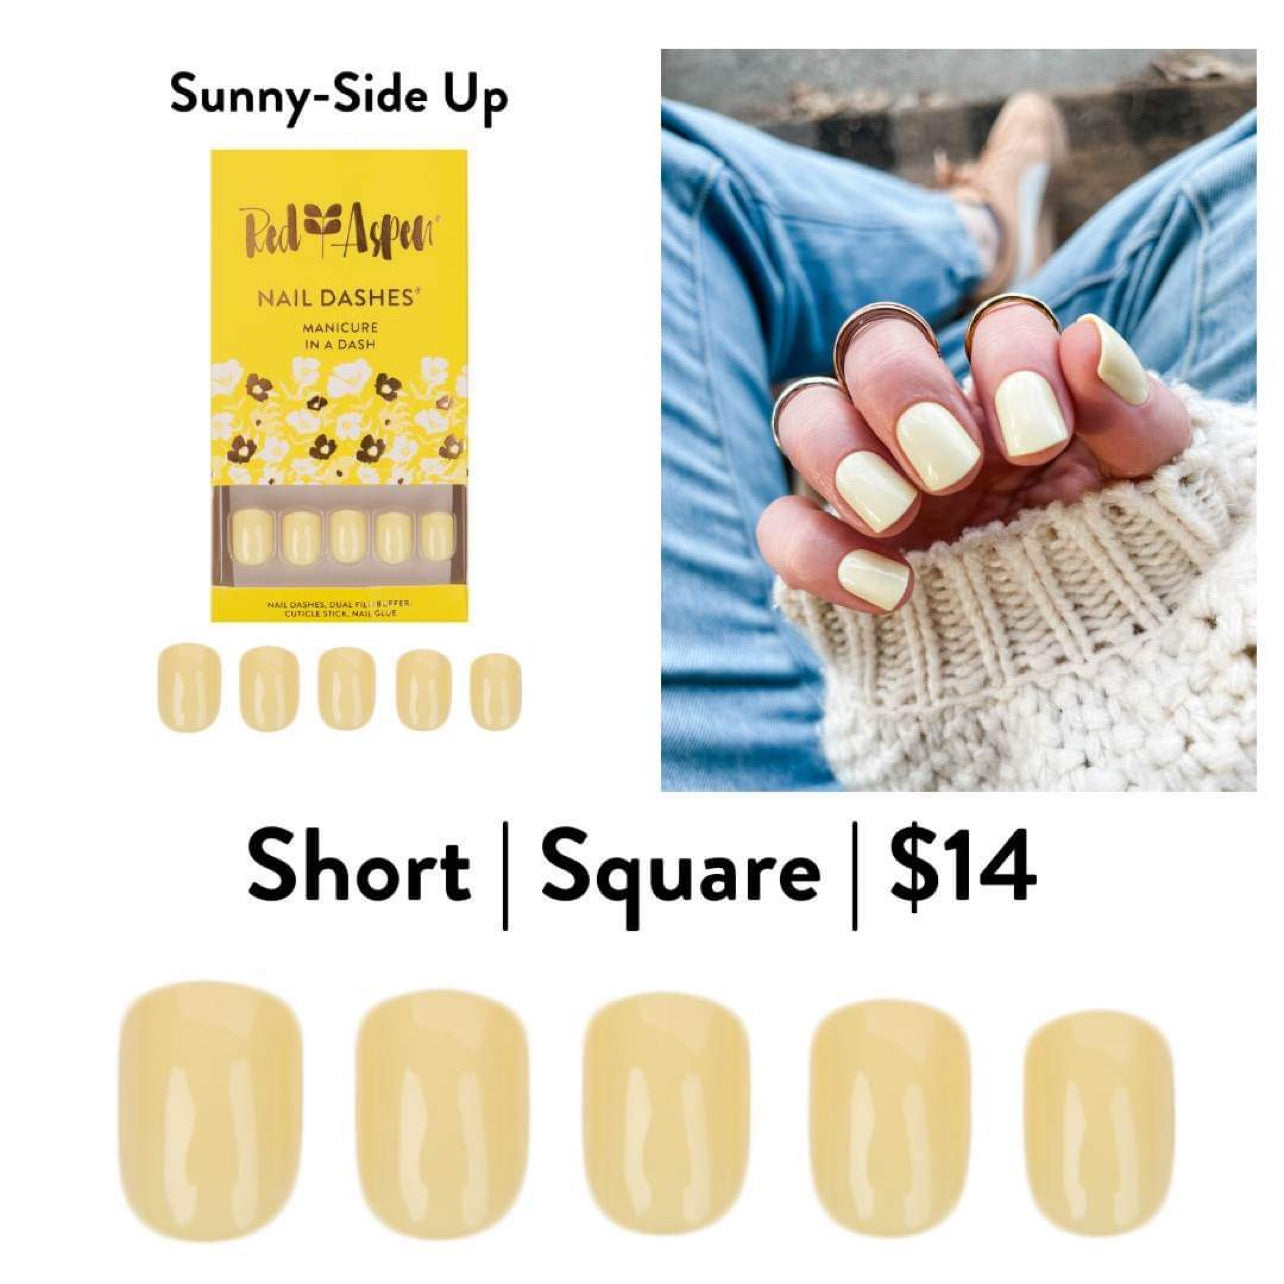 Red Aspen Nail Dashes [Sunny Side-Up]